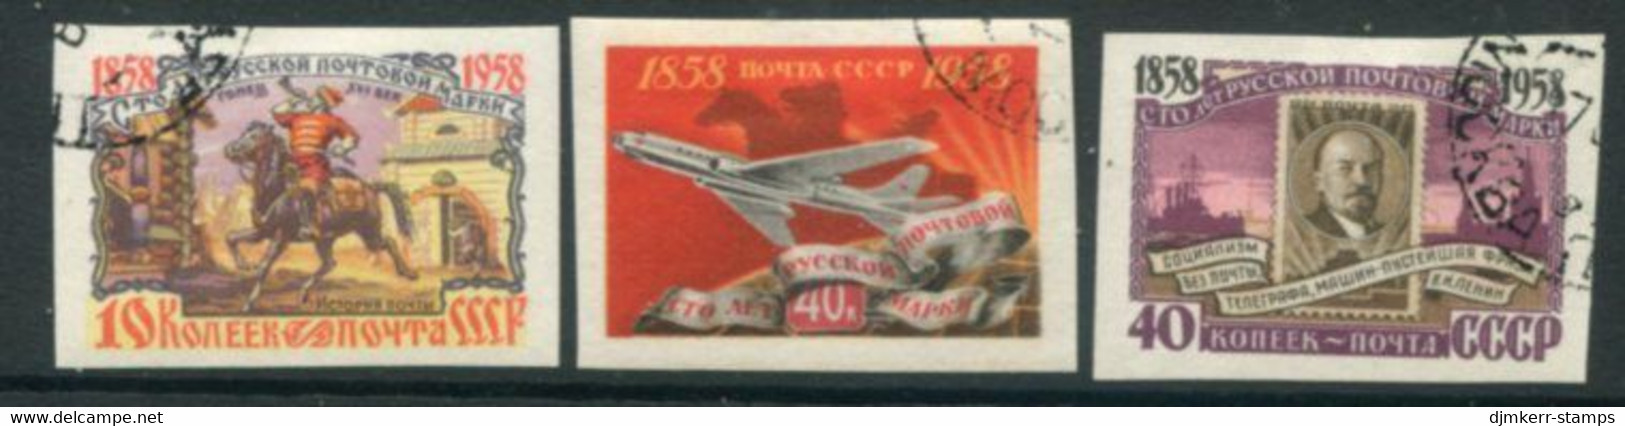 SOVIET UNION 1958 Russian Stamp Centenary Imperforate Used.  Michel 2114, 2118-19 B - Gebraucht